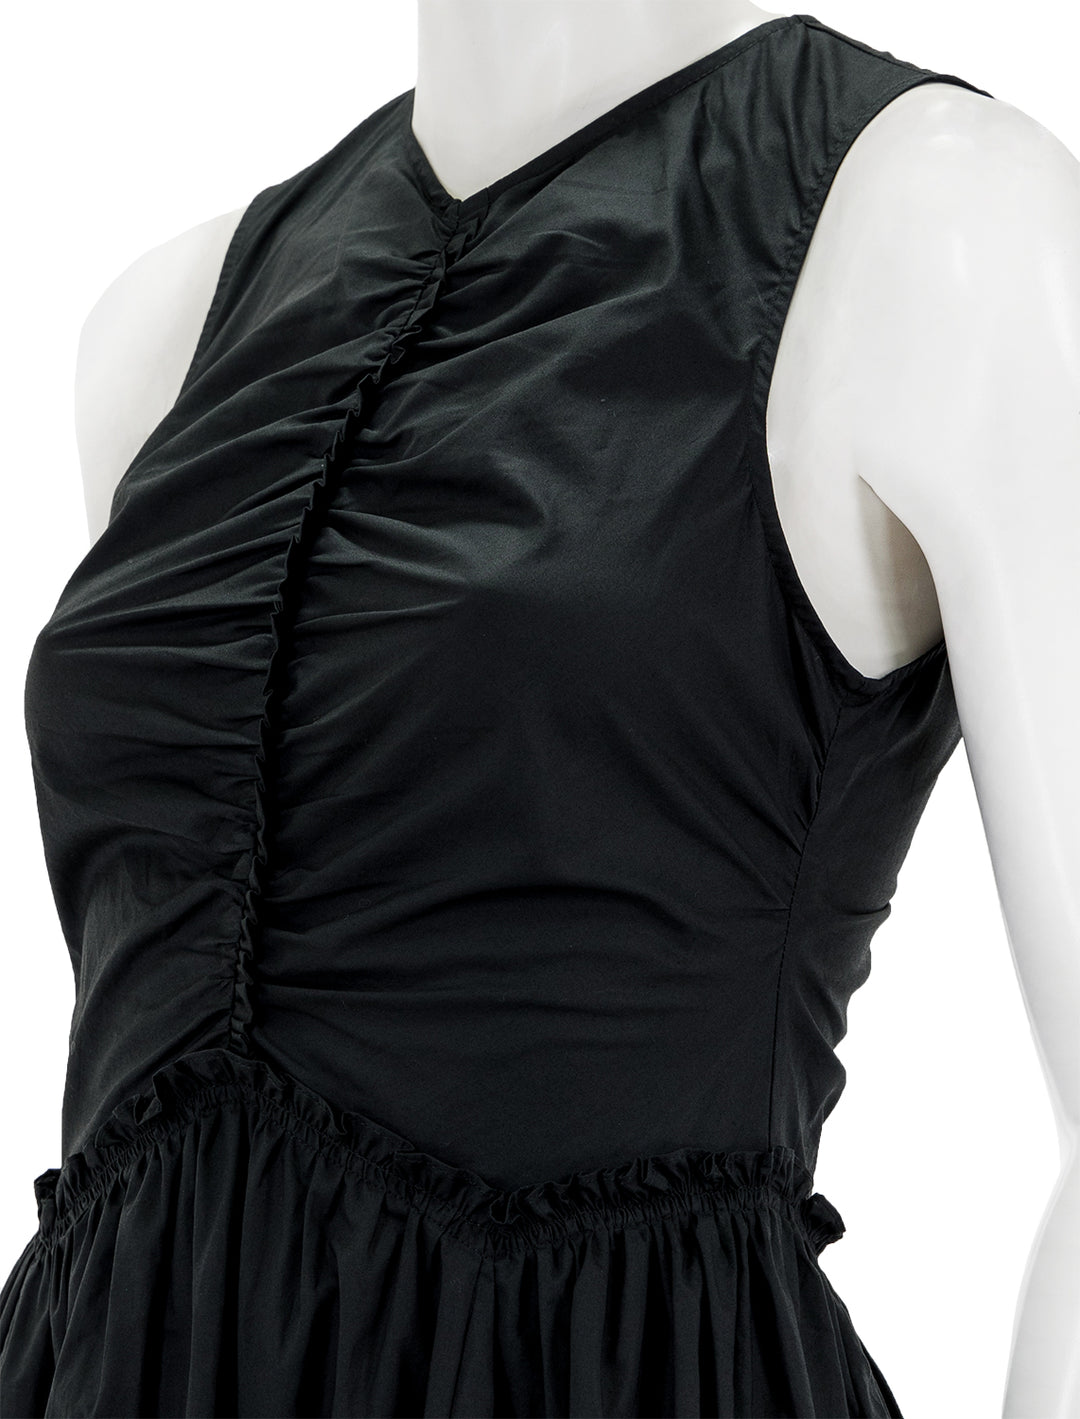 Close-up view of Ulla Johnson's mimi dress in noir.